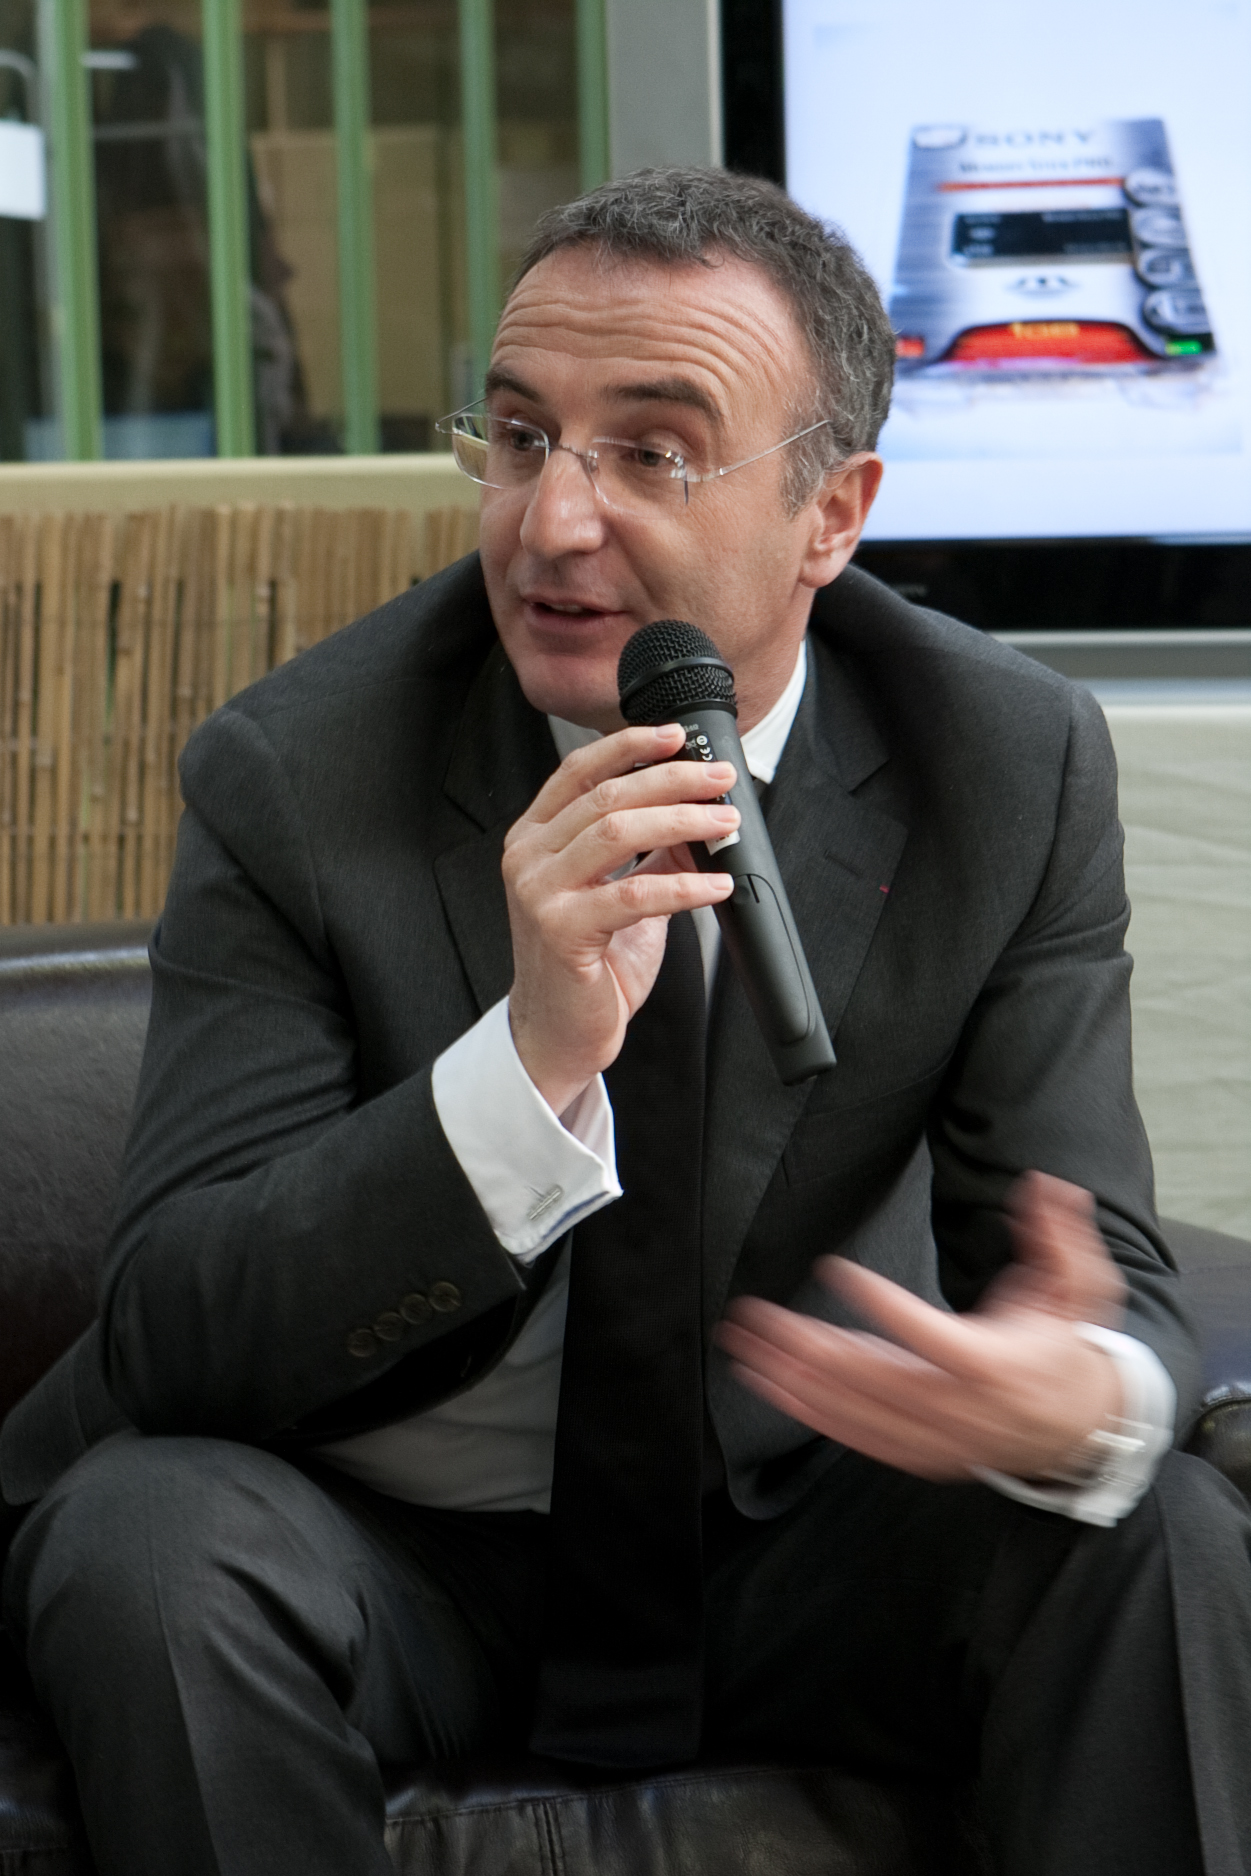 a man in a suit talks into a microphone